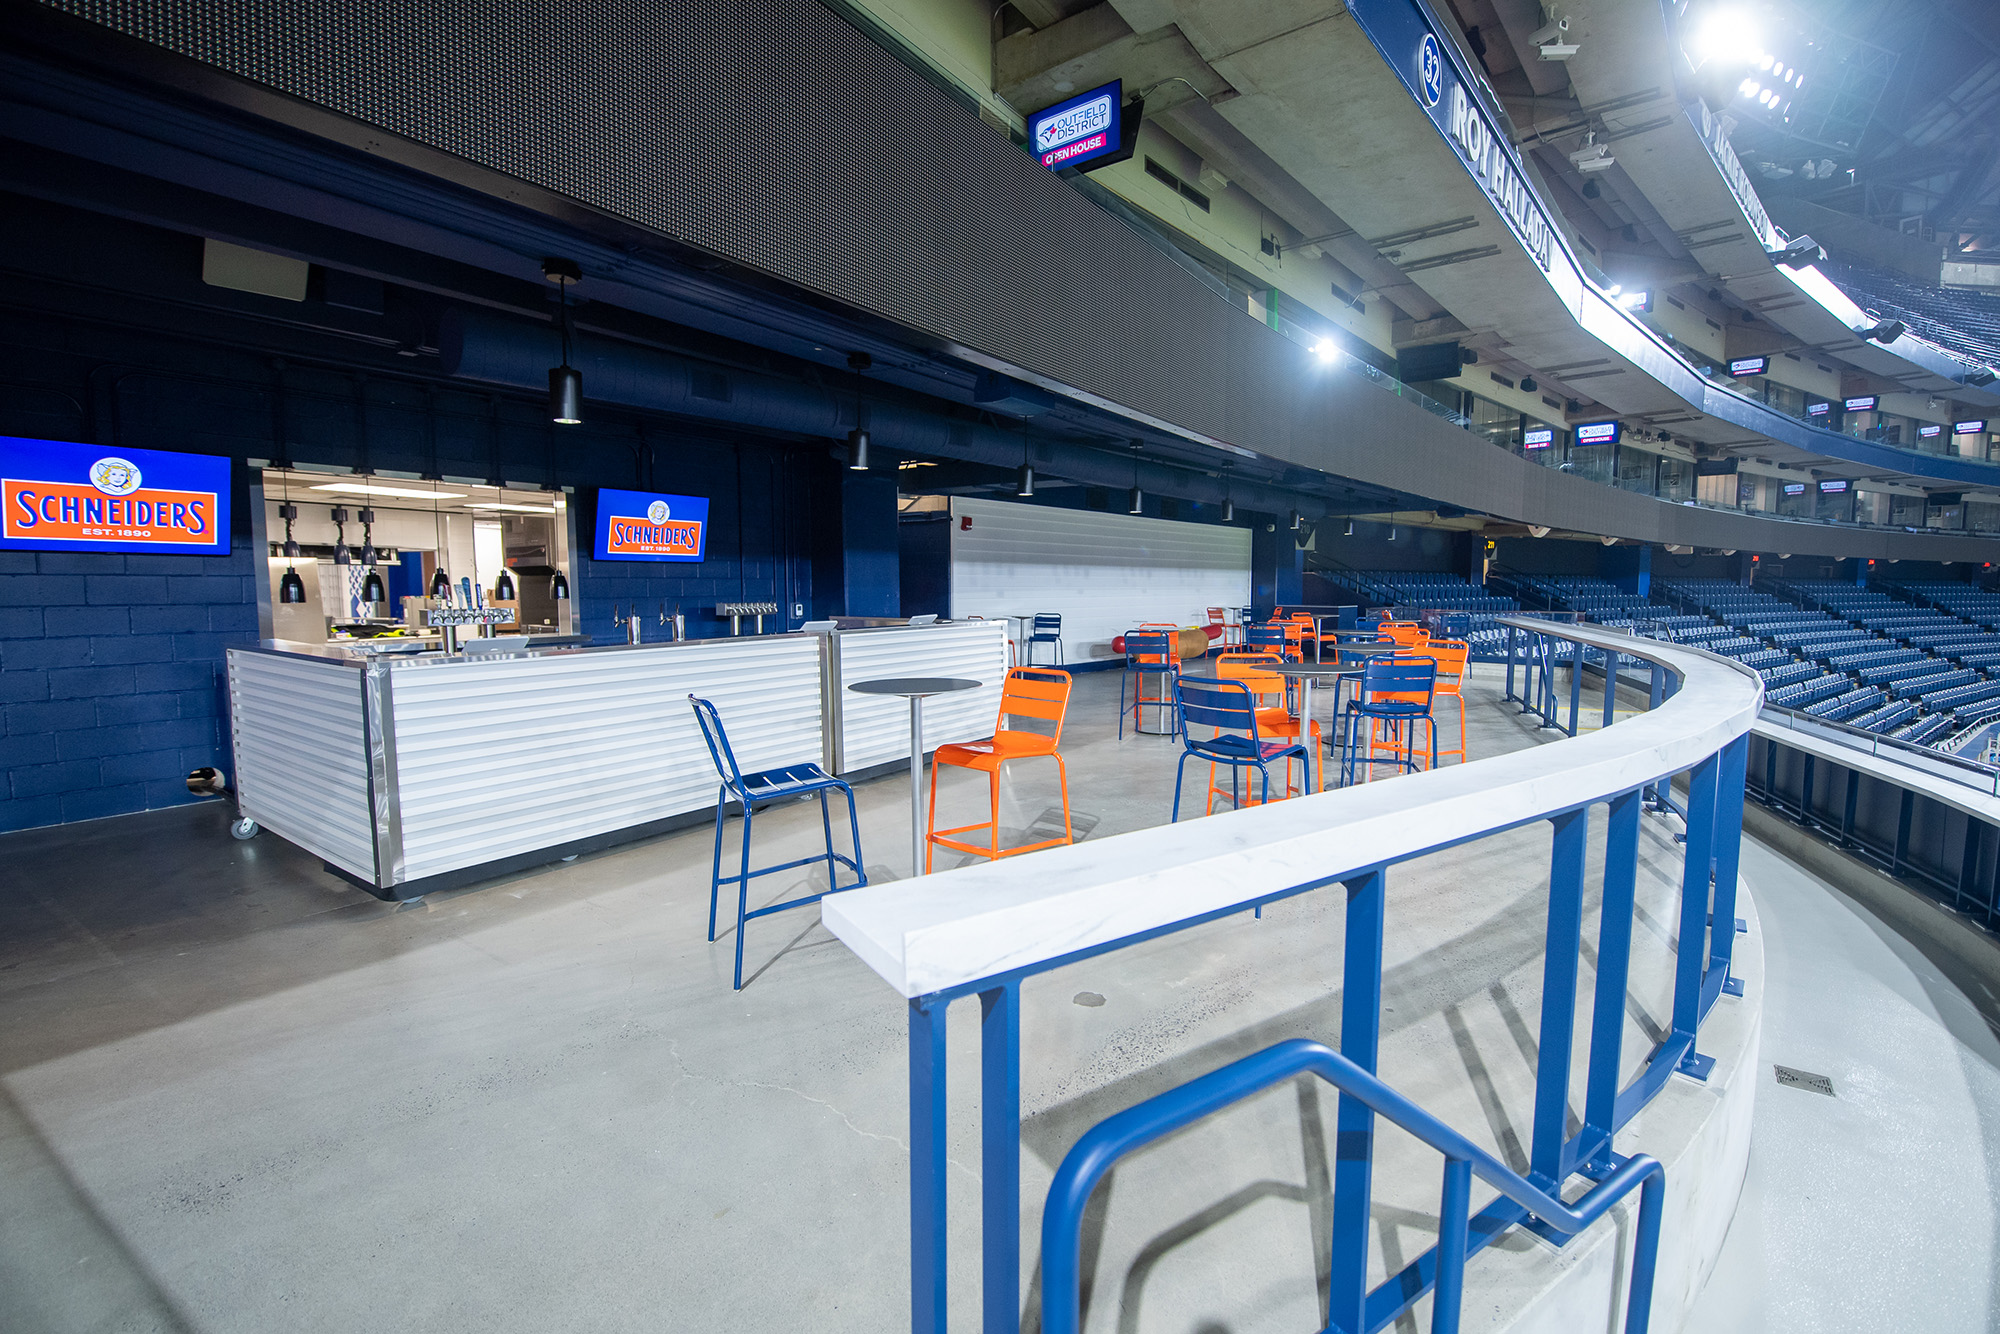 2024 Rogers Centre renovations unveiled by Blue Jays - Ballpark Digest